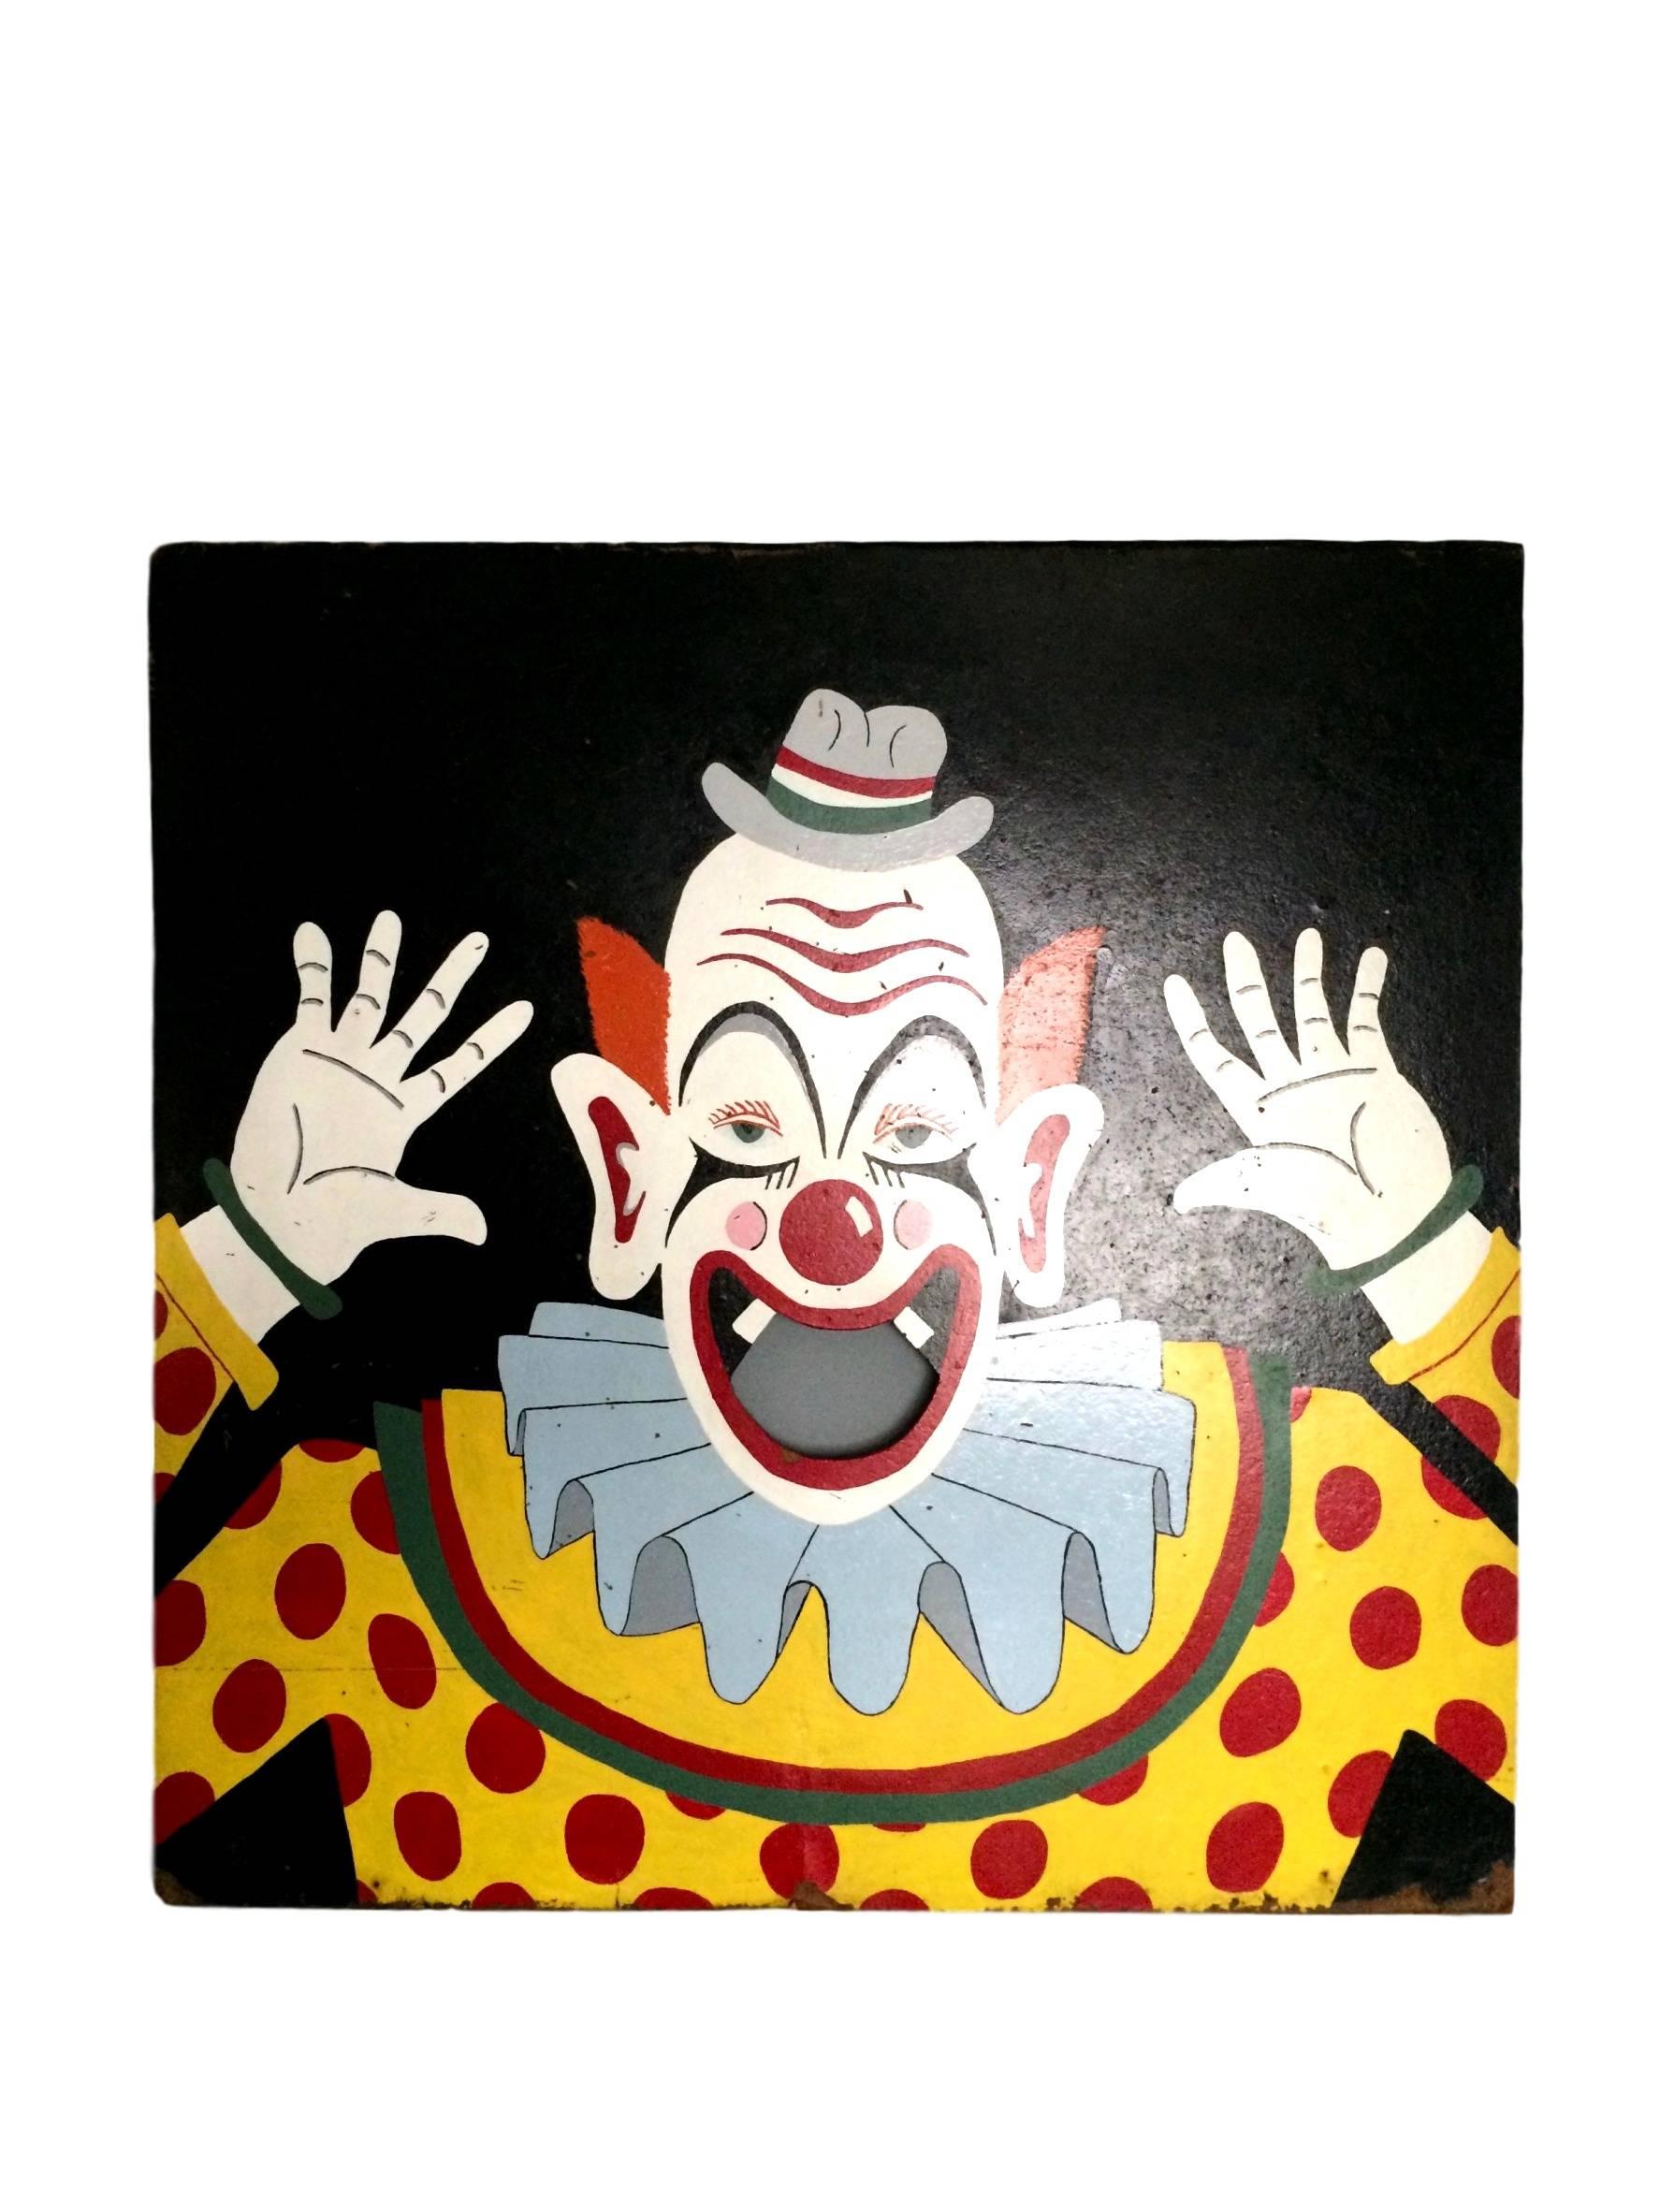 Great vintage board from an old carnival. Large hand-painted board depicting a clown with an open mouth. Bean bags were probably used to throw inside. Great piece of wall art with fantastic colors.